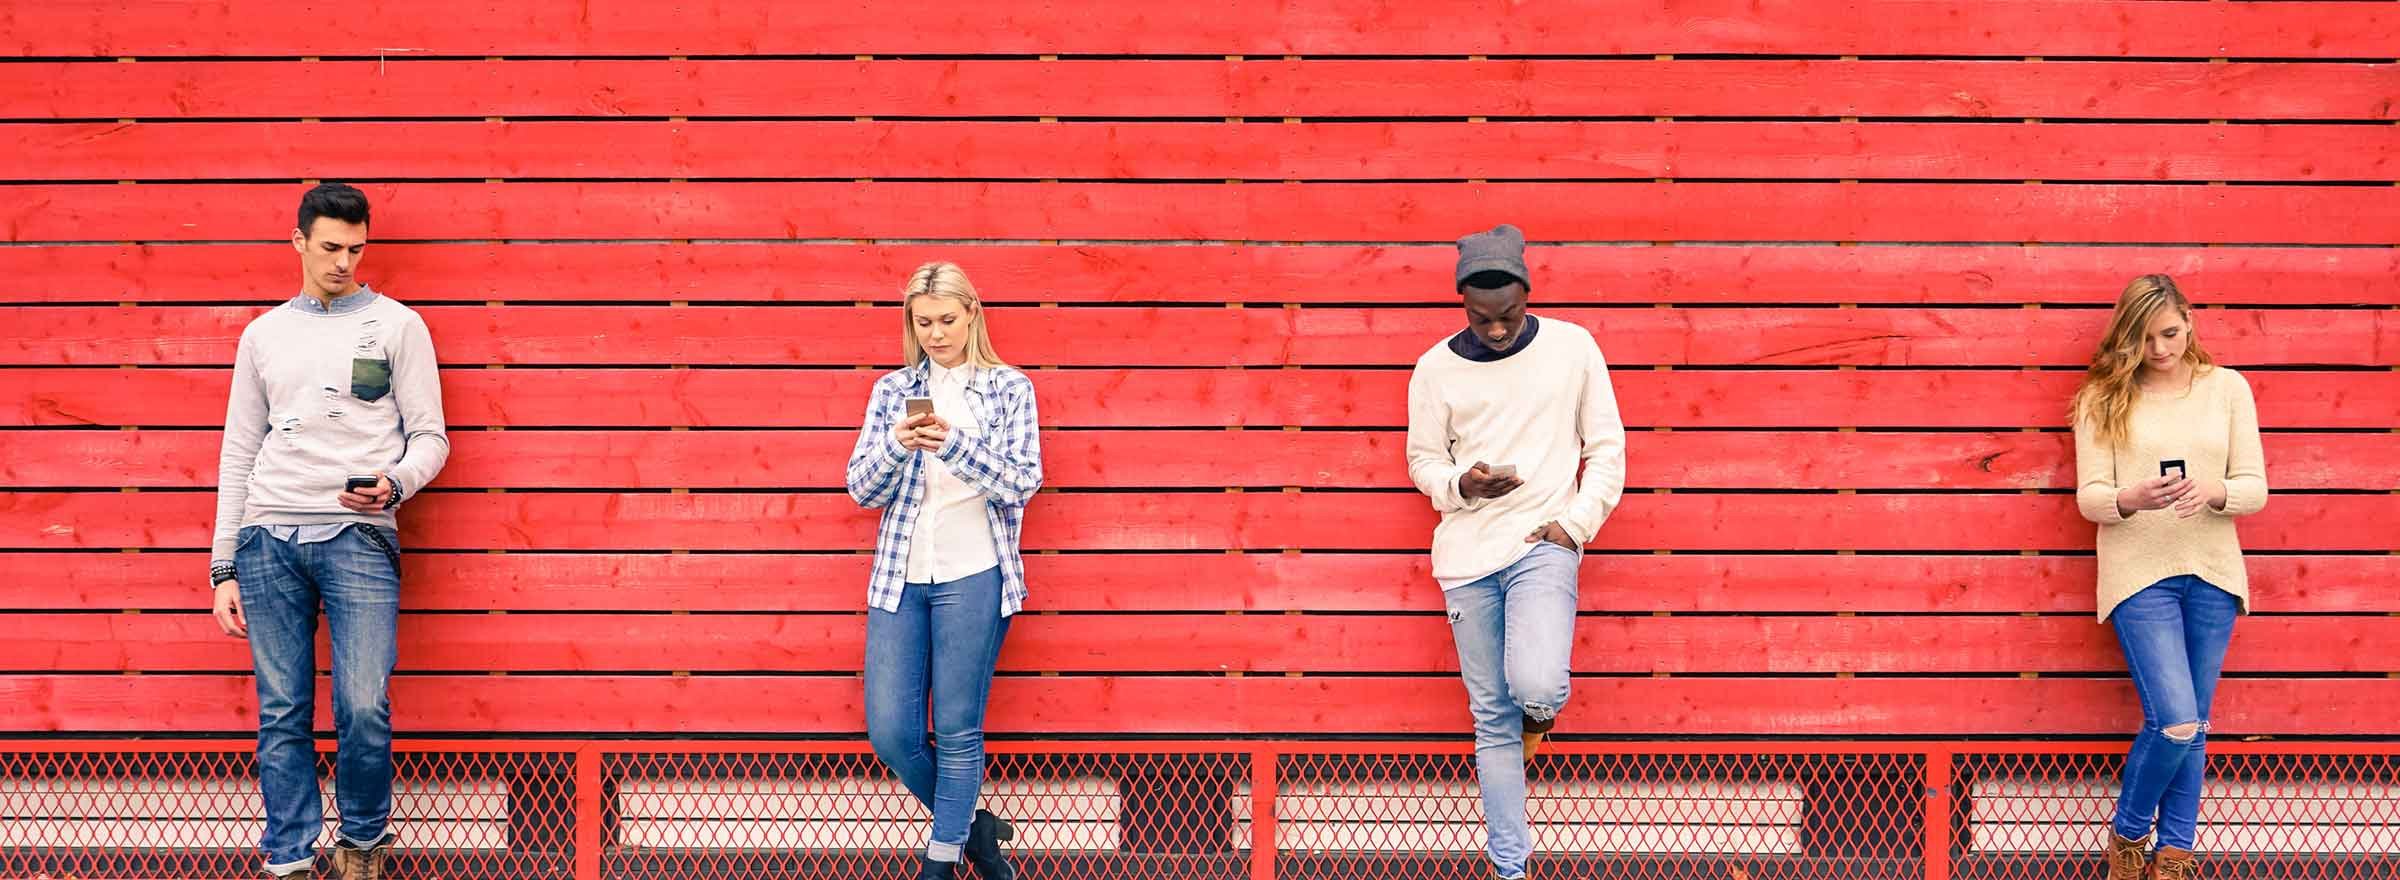 four people leaning against a red fence and looking at smartphones